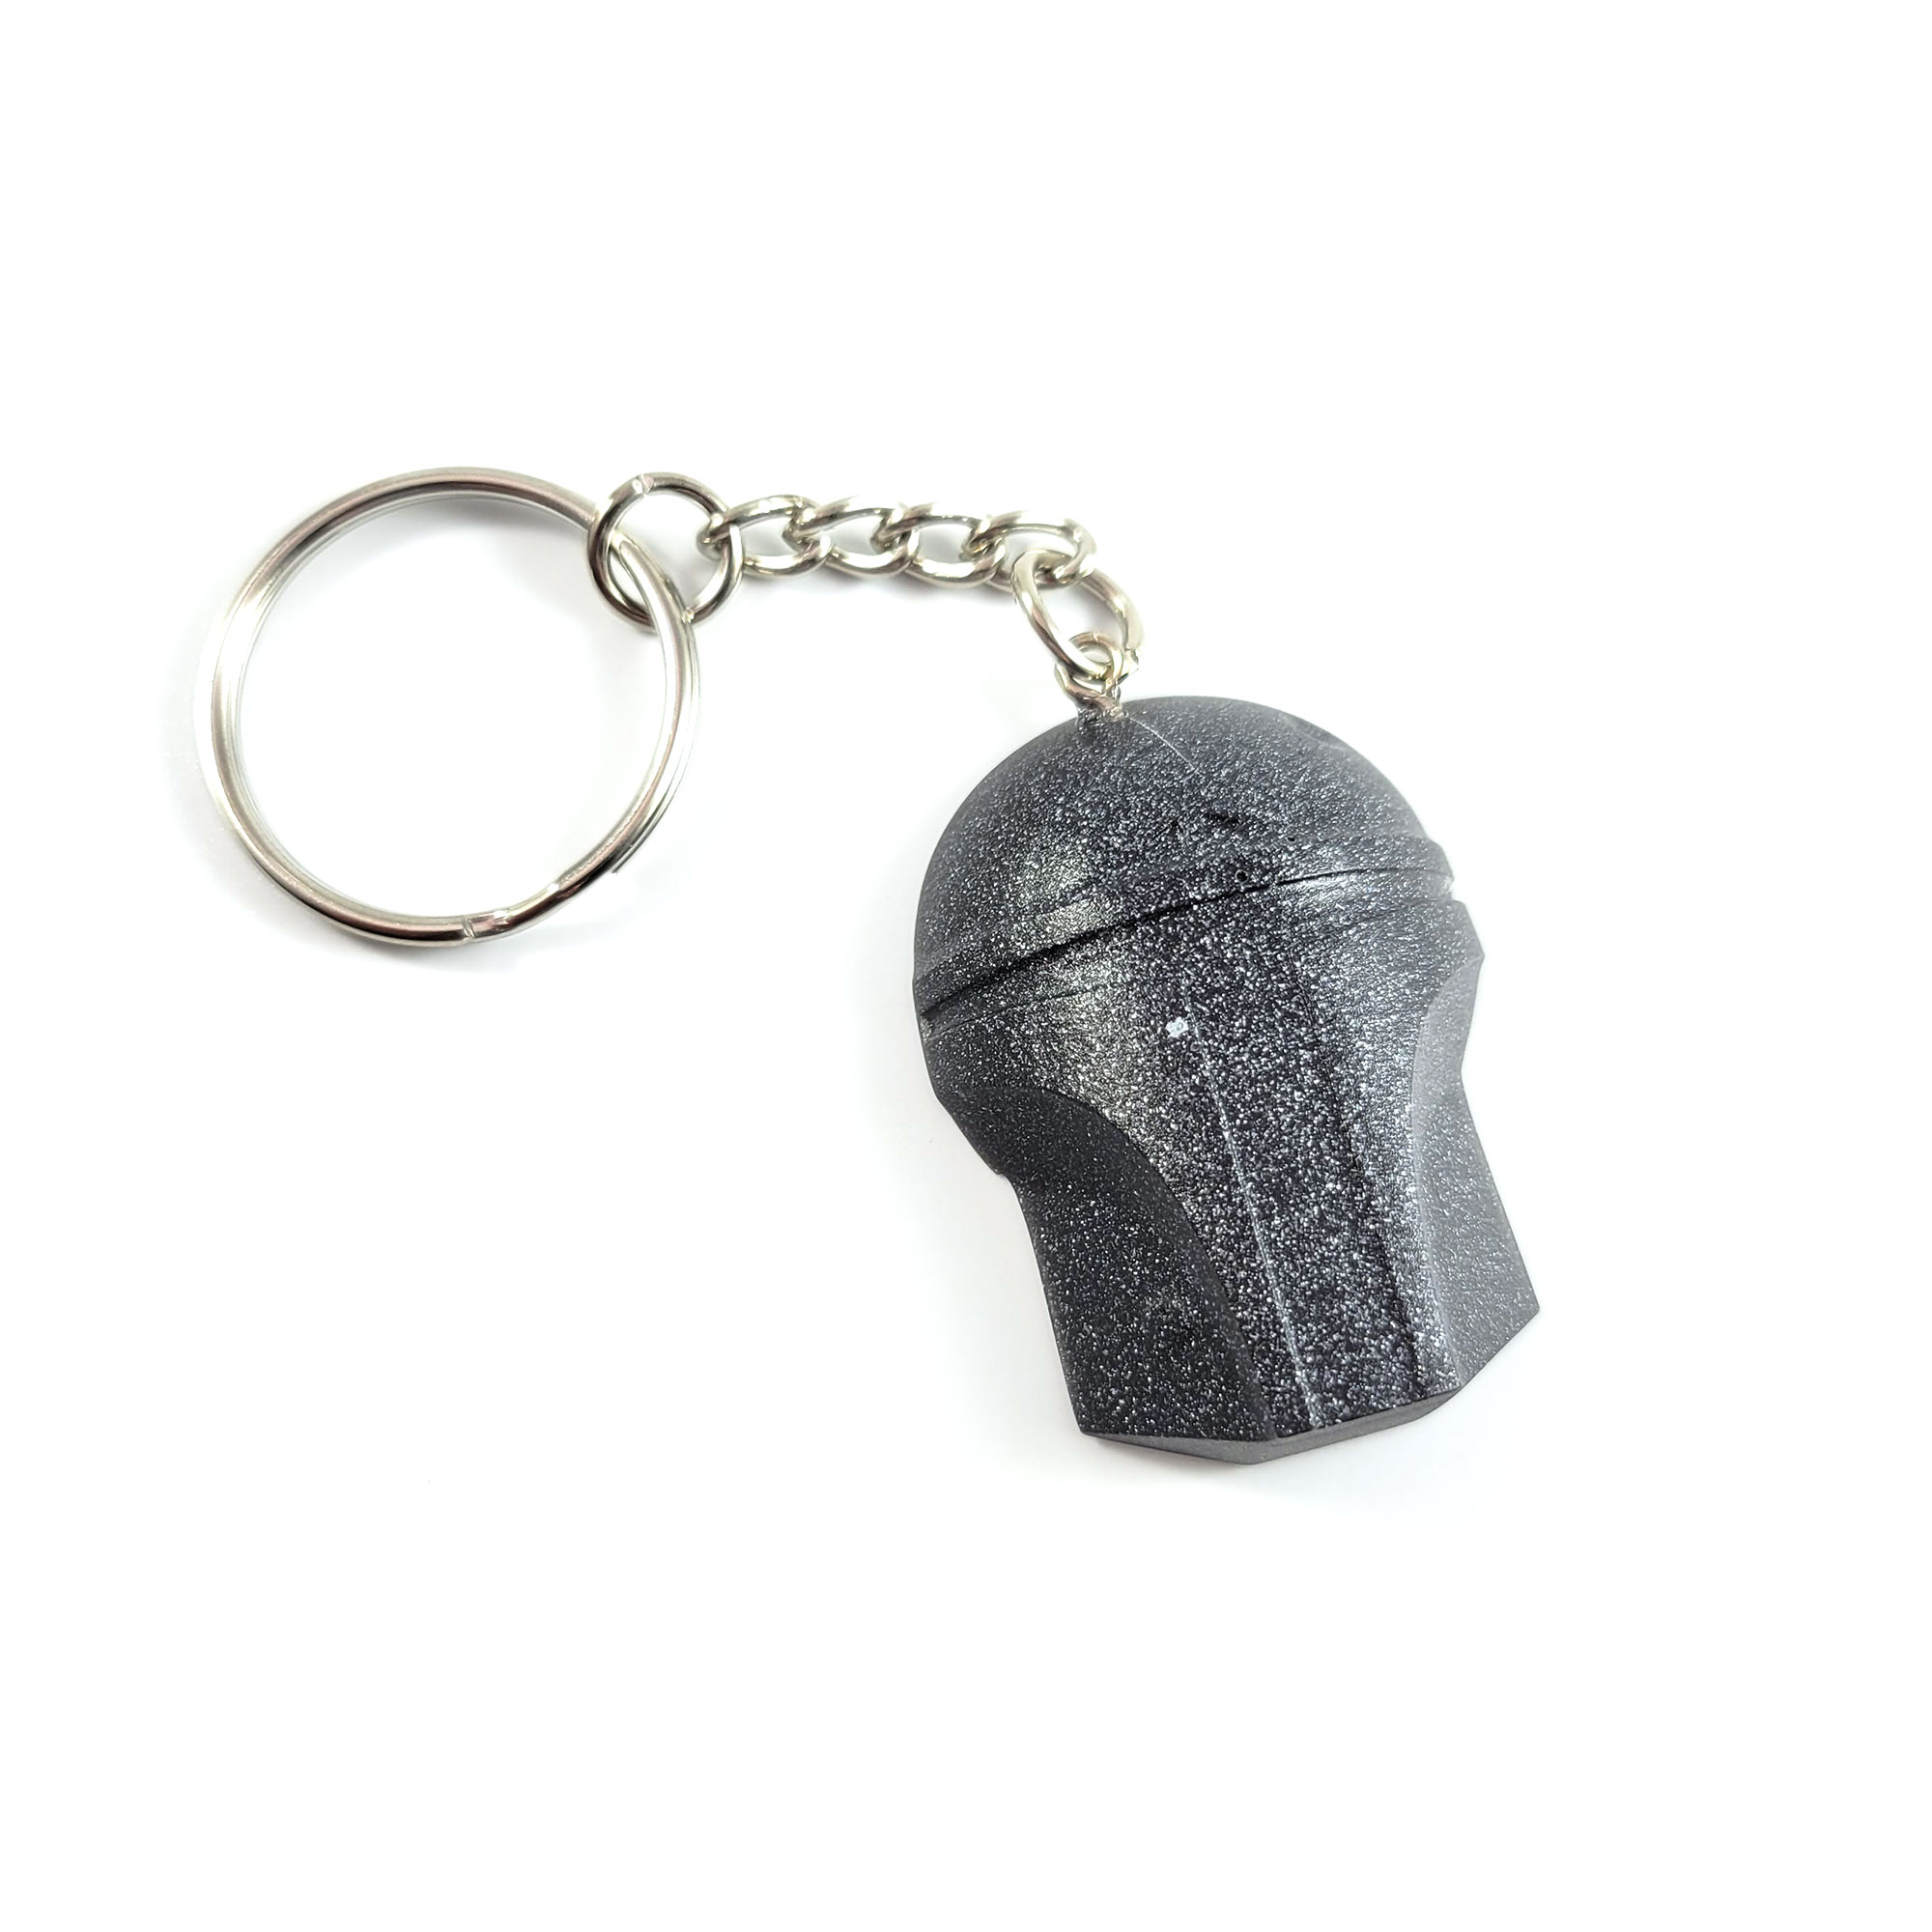 This is the Way Mando Keychain by Wilde Designs